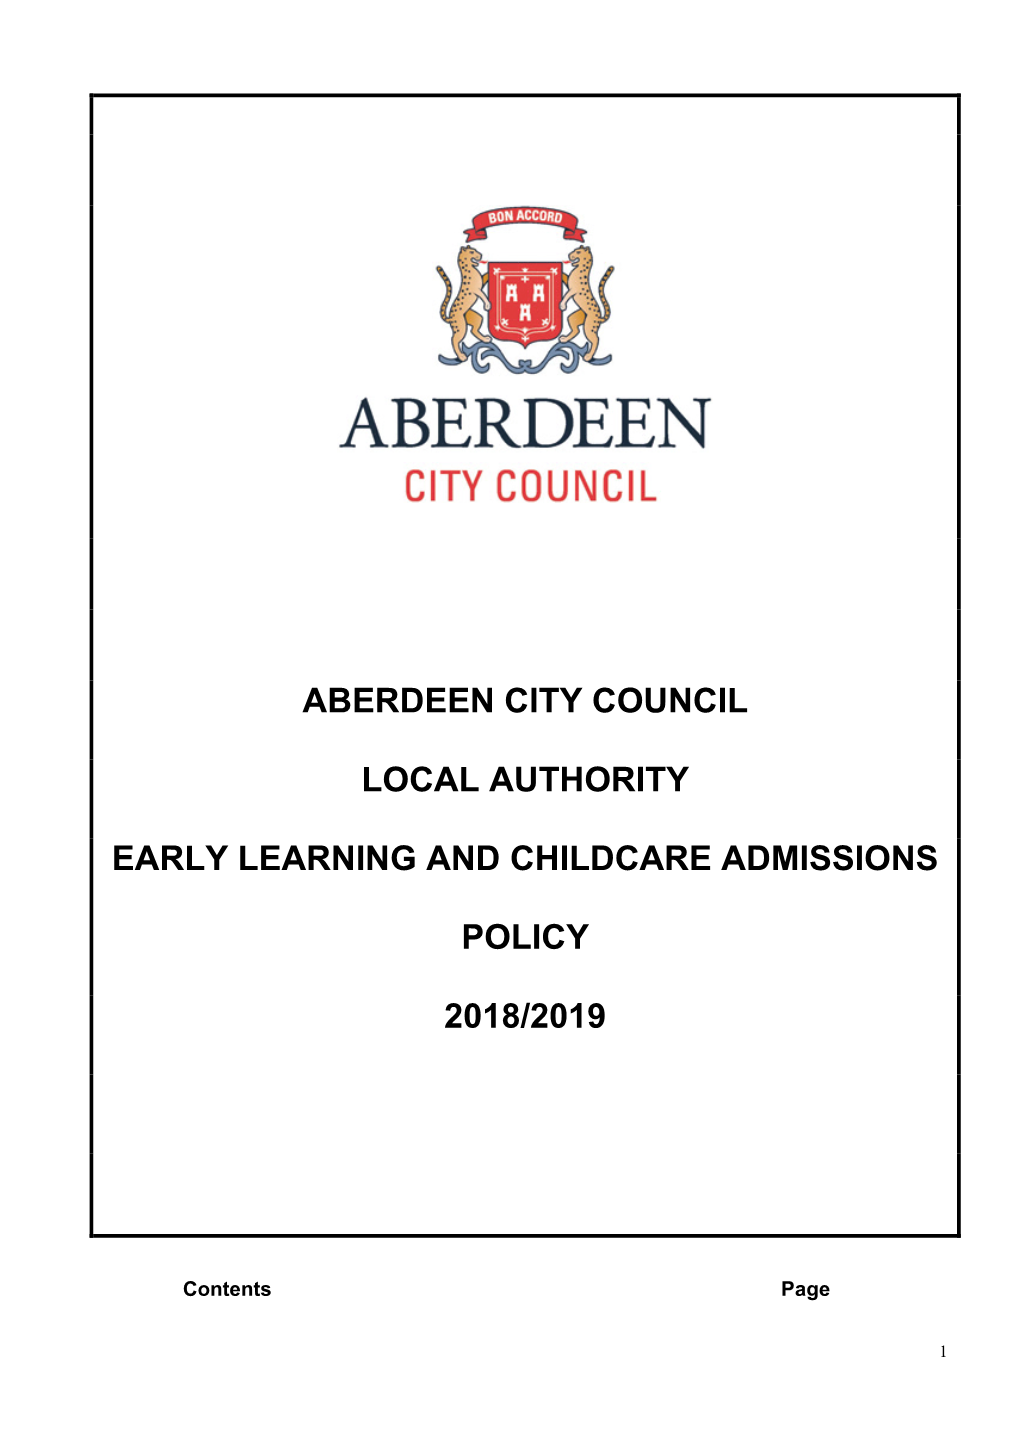 Aberdeen City Council Local Authority Early Learning and Childcare